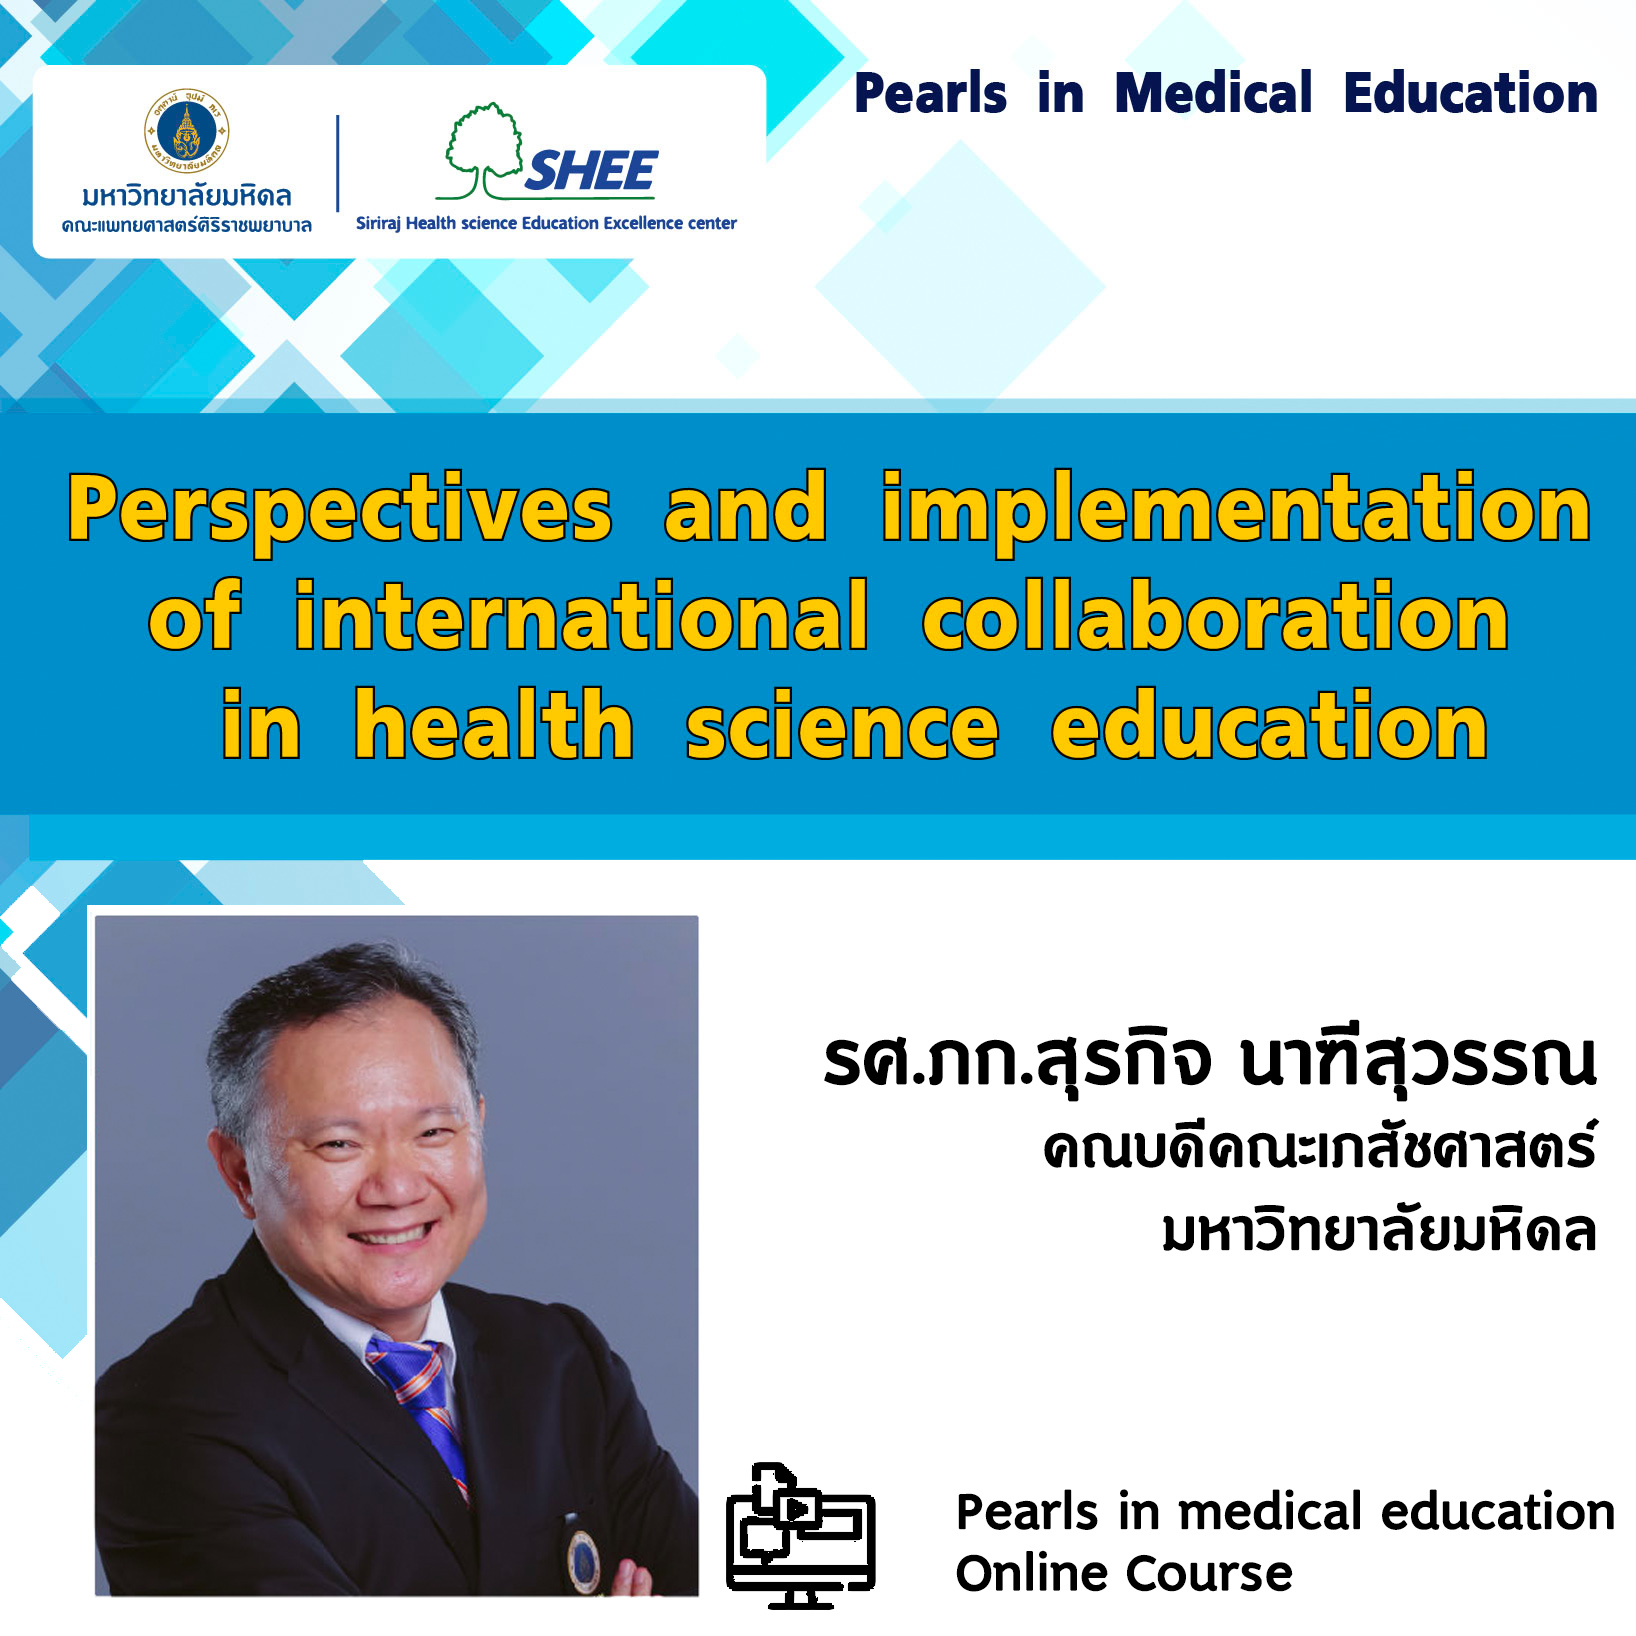 Perspectives and implementation of international collaboration in health science education